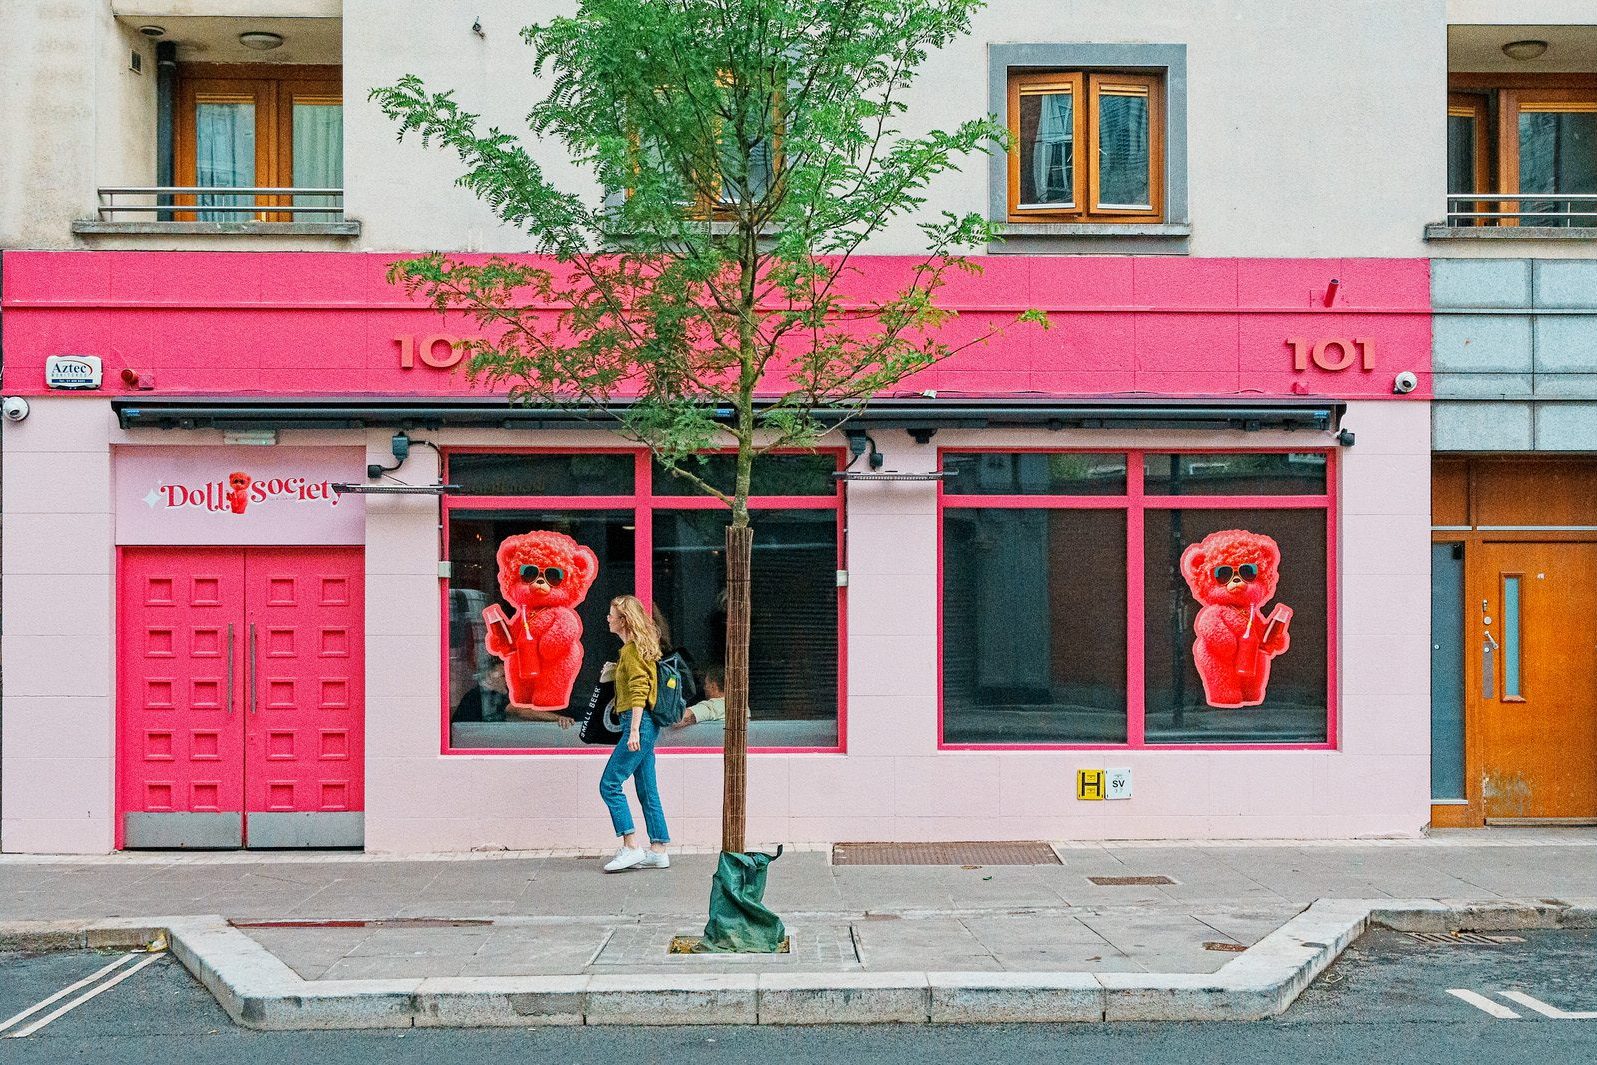 WHEN I FIRST SAW THIS I THOUGHT THAT IT WAS A REALLY REALLY PINK TOY SHOP [THE DOLL SOCIETY AT 101 FRANCIS STREET] 008